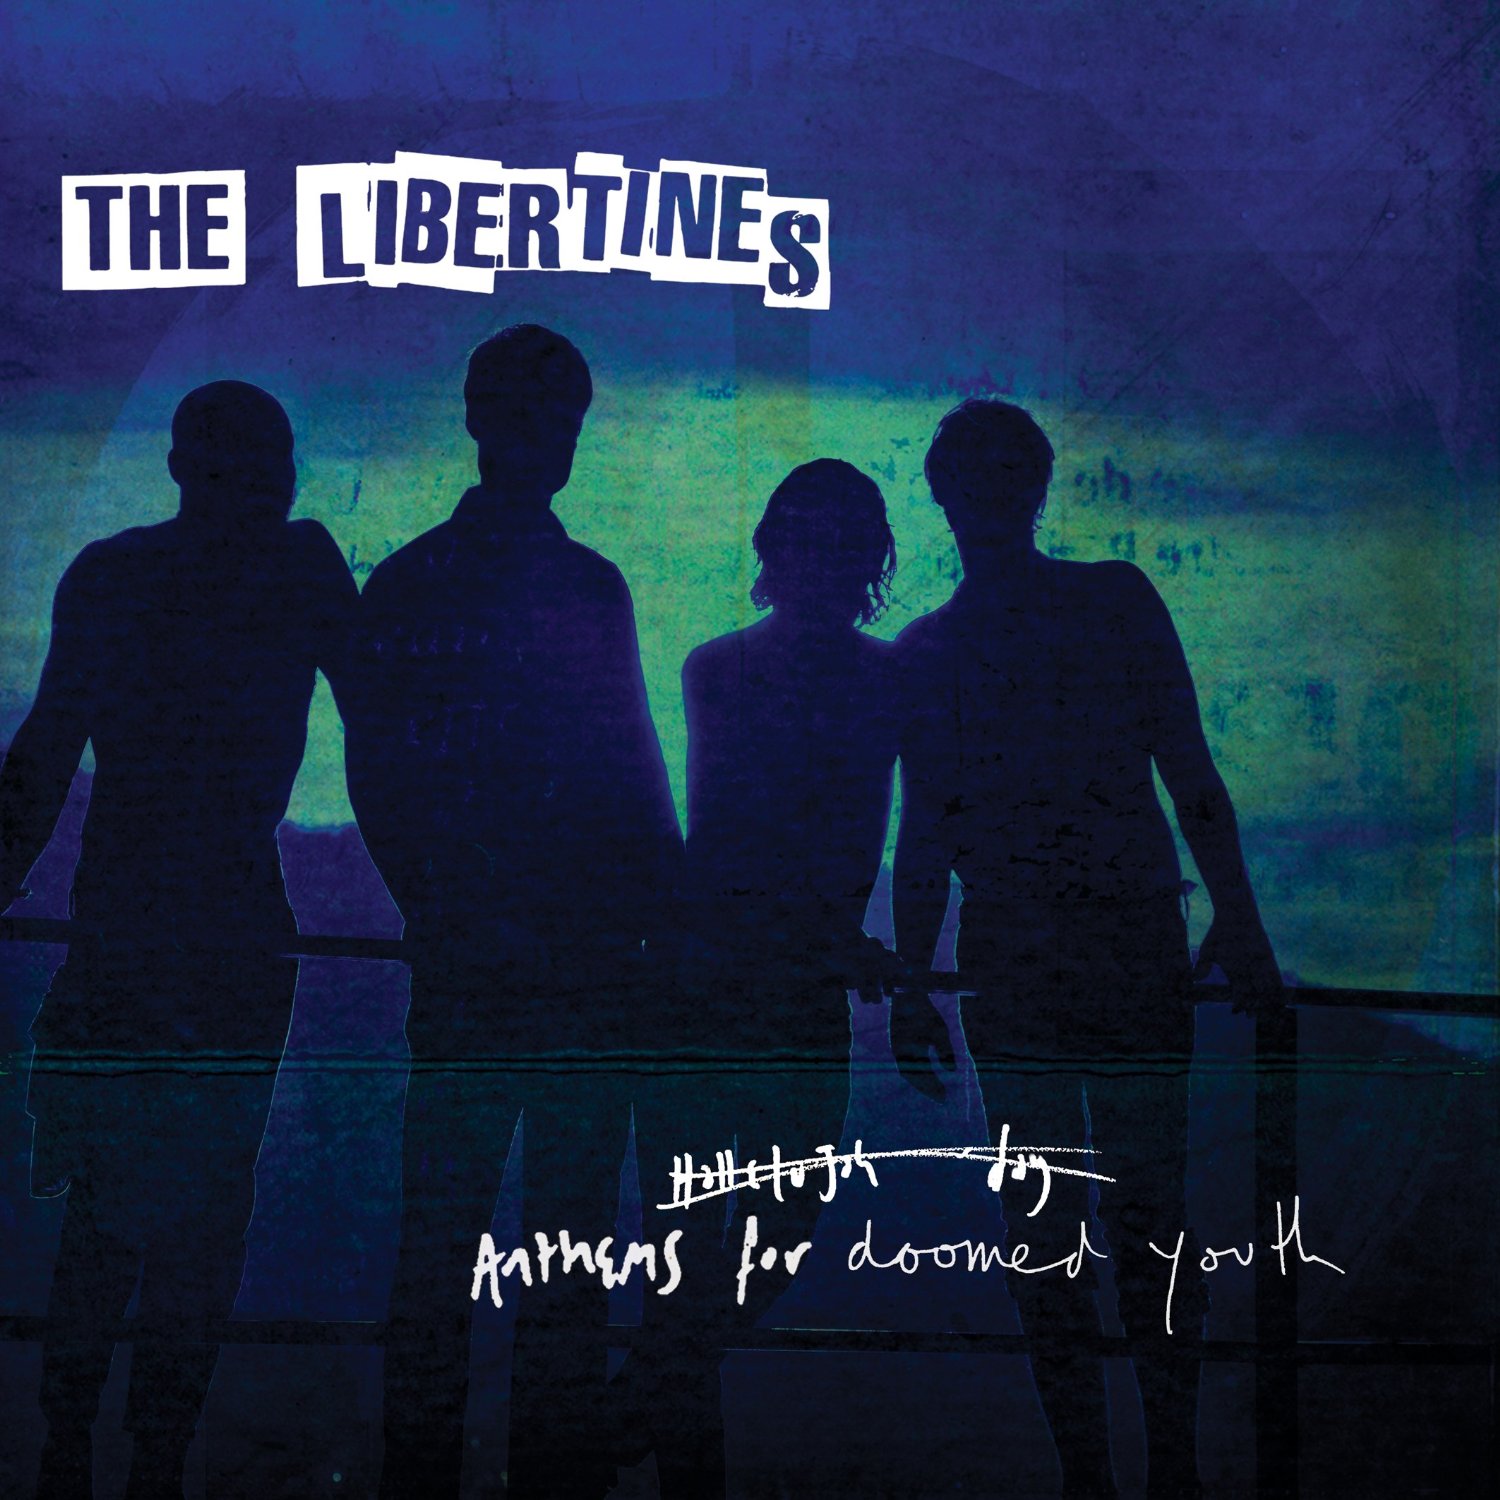 The Libertines - Anthems for Doomed Youth (Music CD)